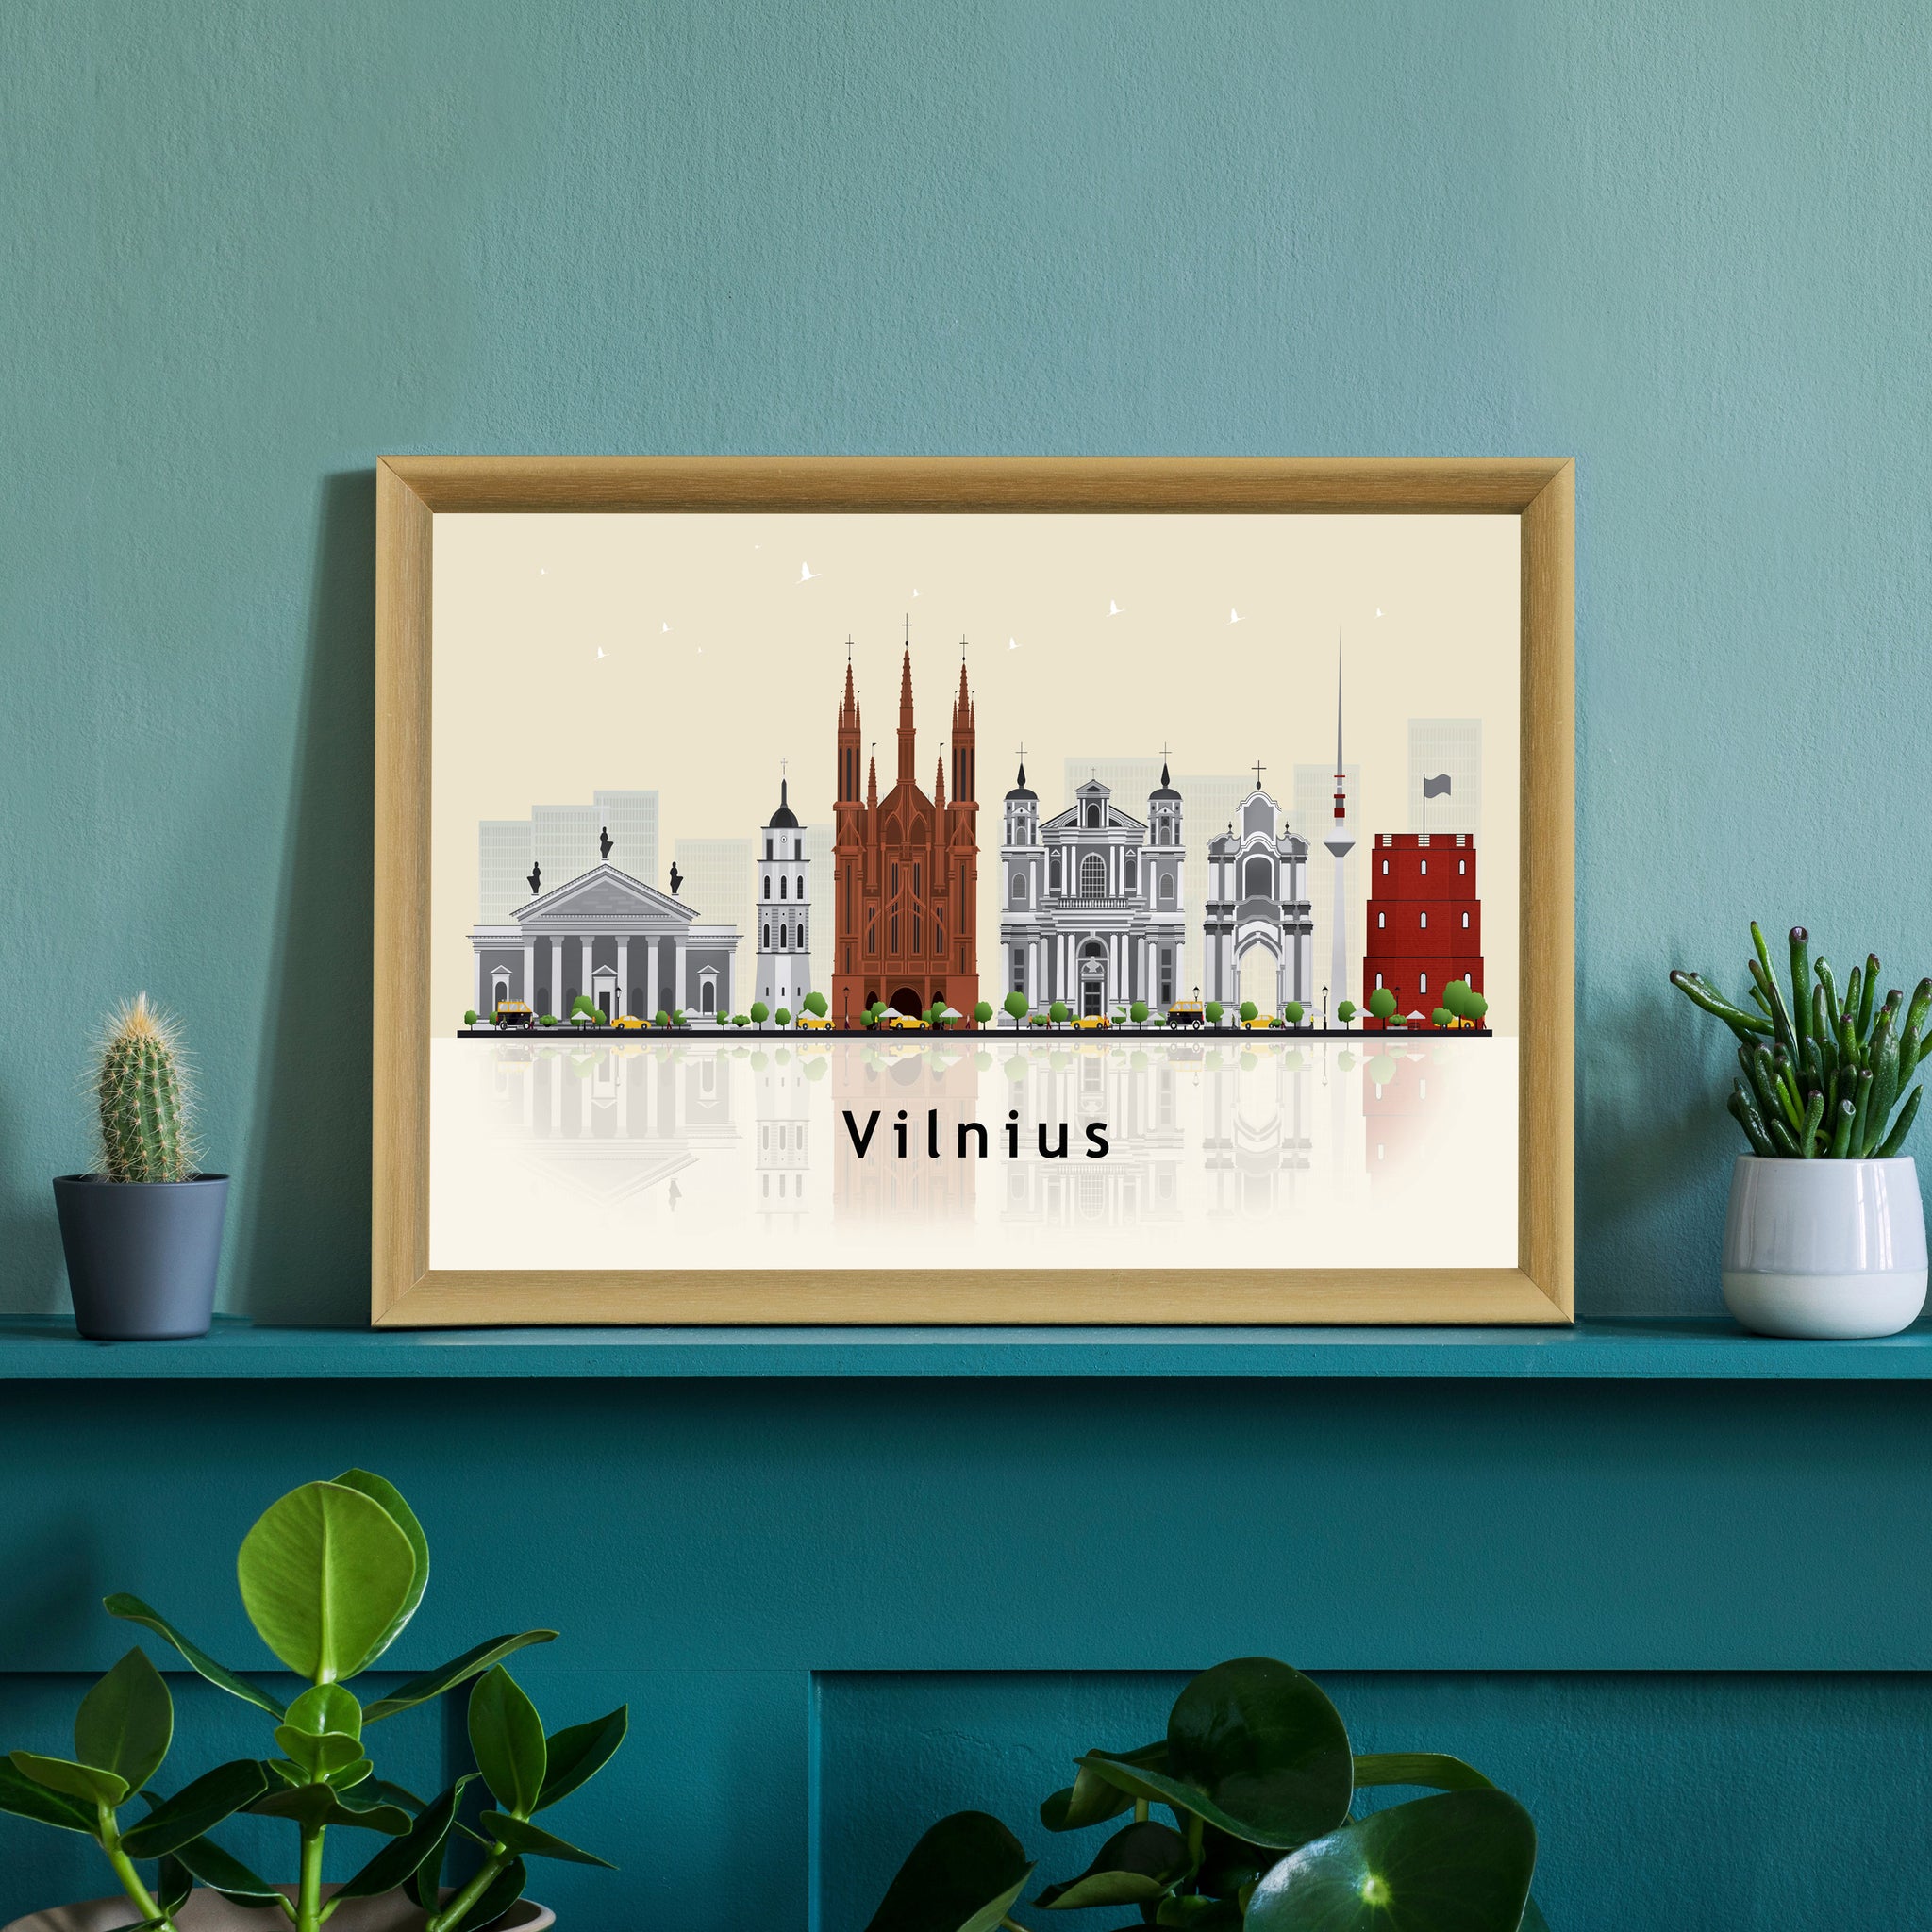 VILNIUS LITHUANIA  Illustration skyline poster, Modern skyline cityscape poster print, Vilnius landmark map poster, Home wall decoration